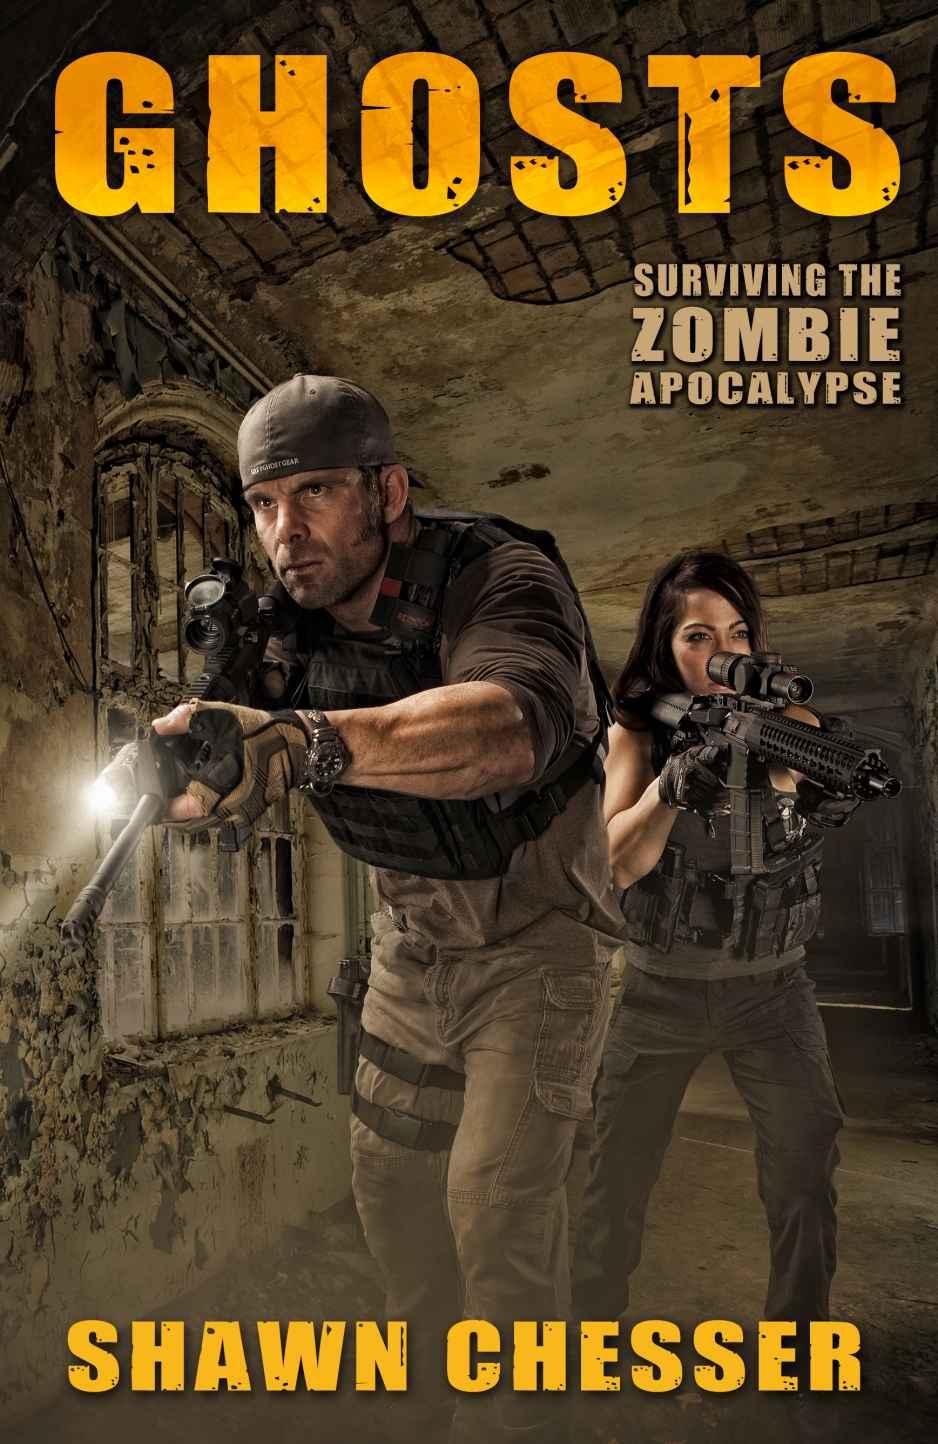 Read online “Ghosts: Surviving the Zombie Apocalypse” |FREE BOOK